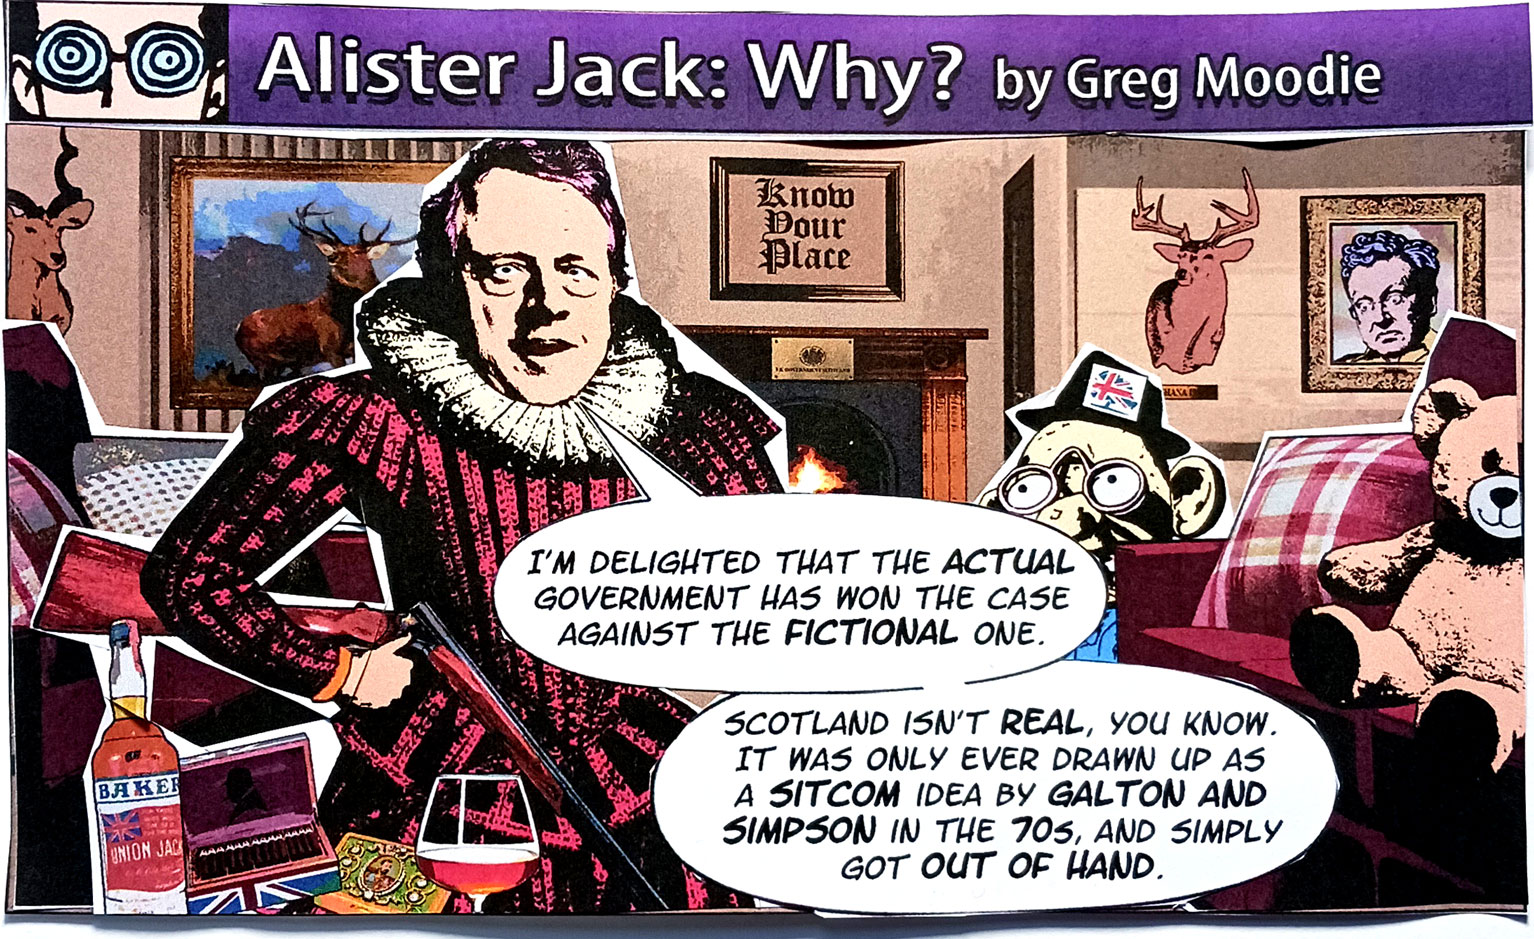 Alister Jack: Why?